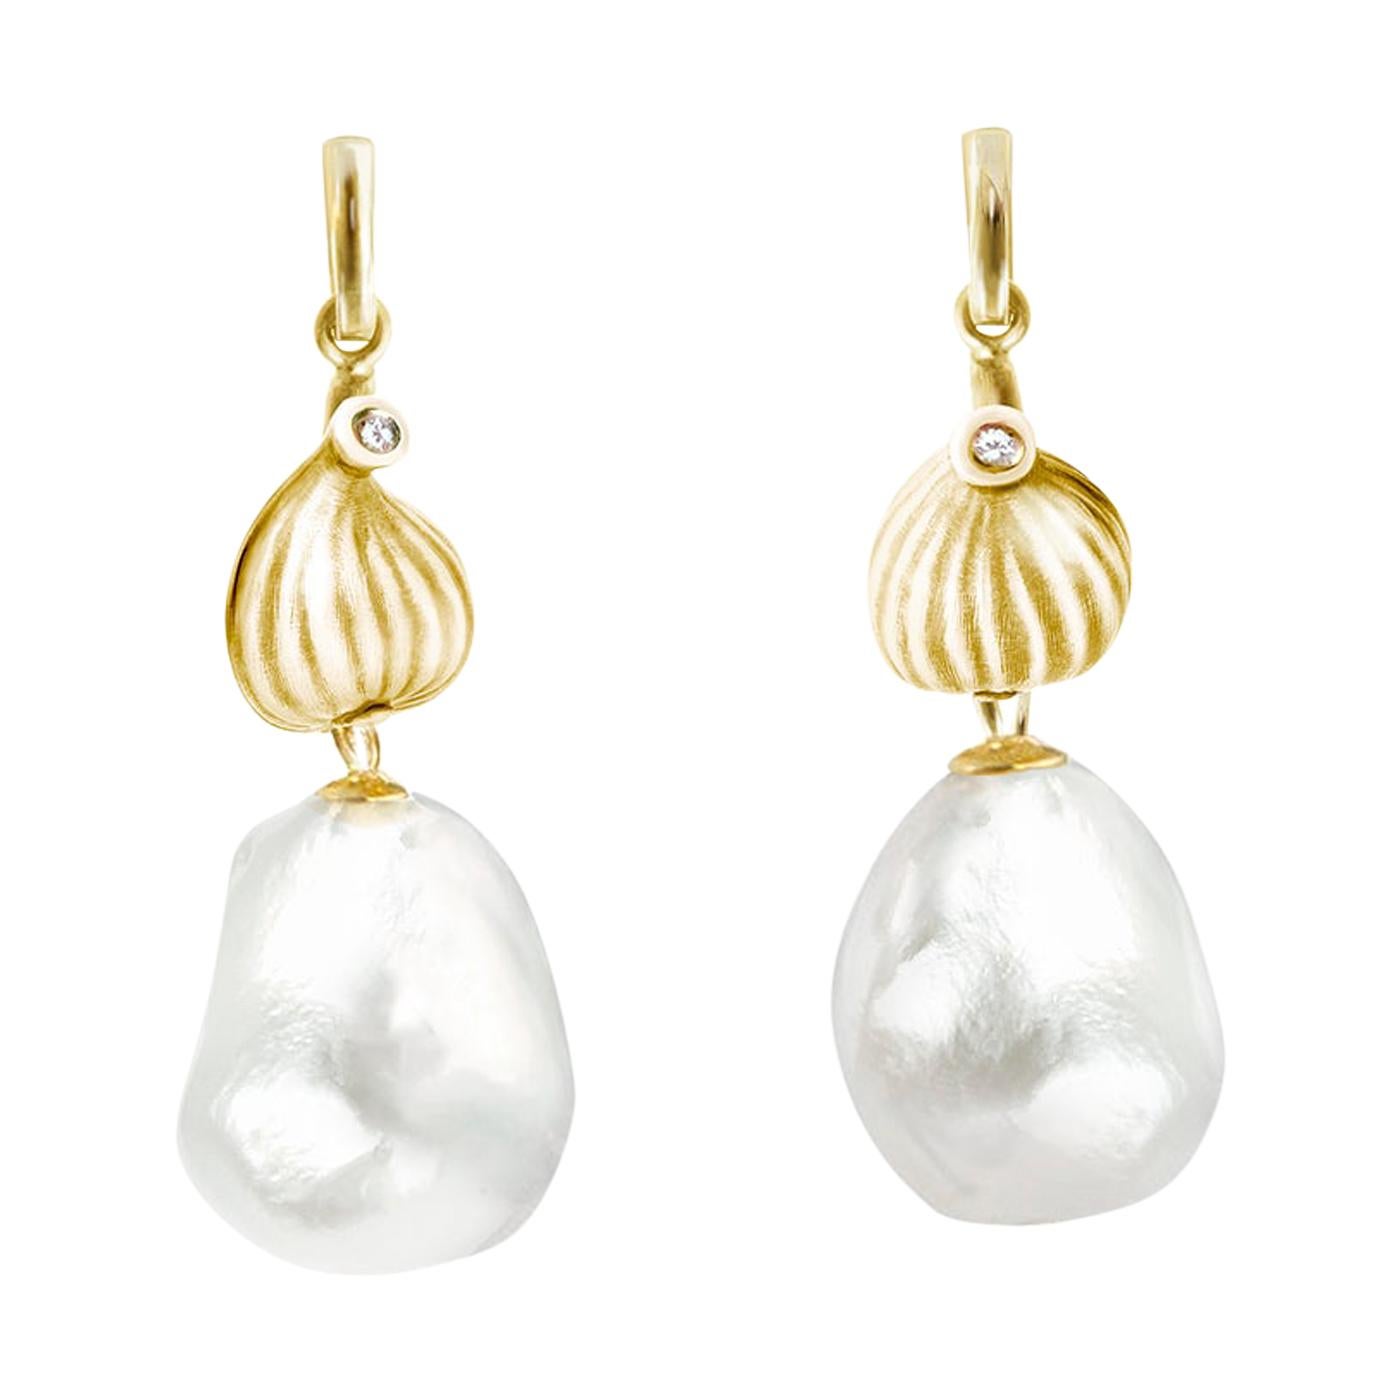 14 Kt Yellow Gold Fig Drop Earrings with Pearls and Diamonds by the Artist